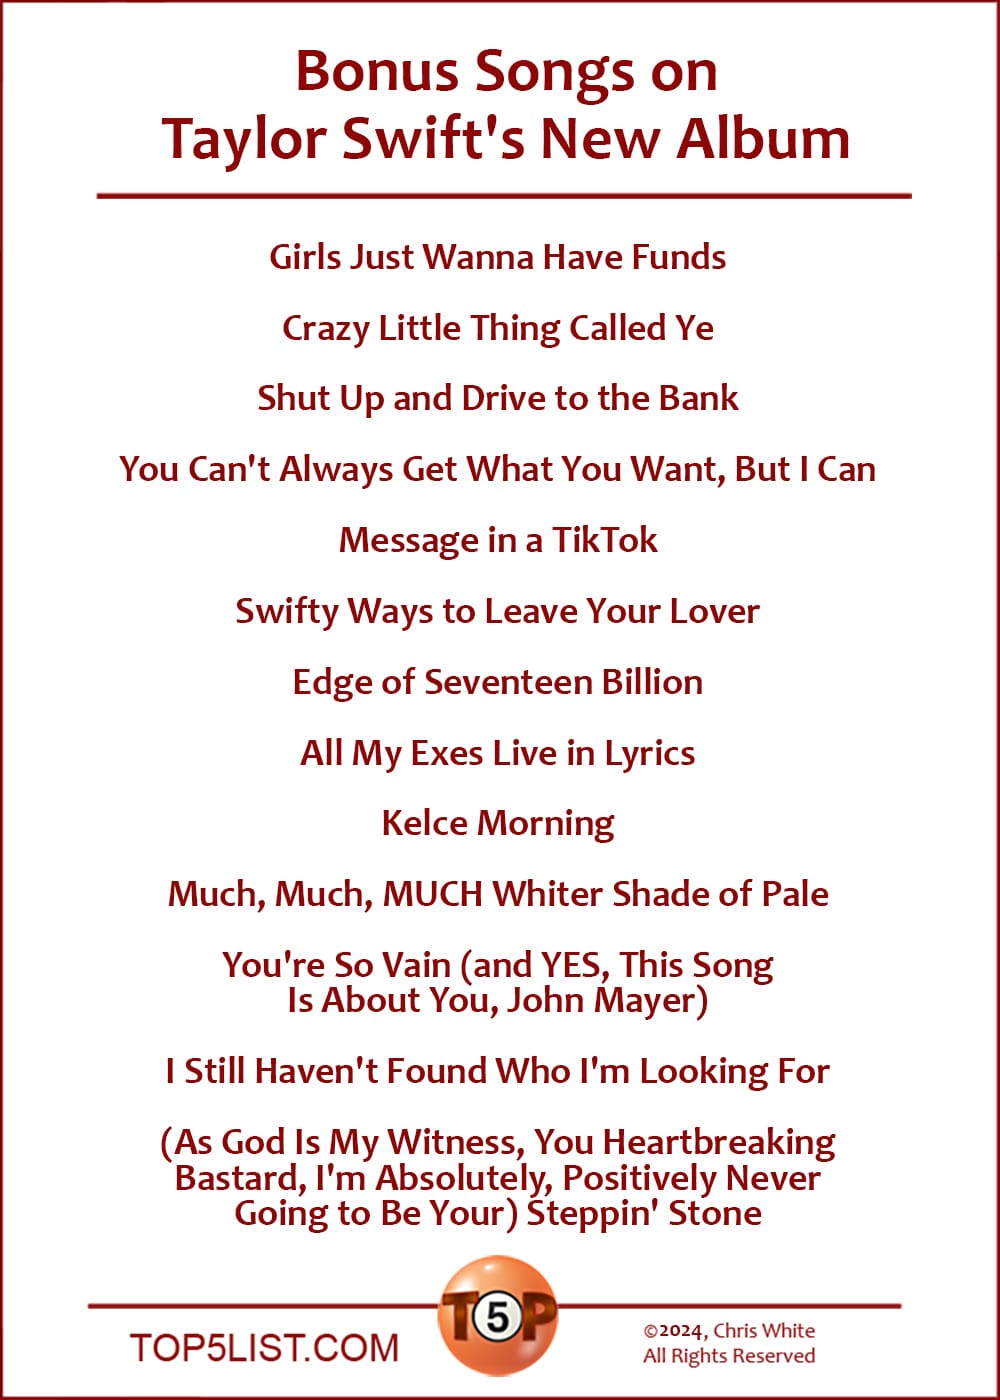 Bonus Songs on Taylor Swift's New Album  |   Girls Just Wanna Have Funds  Crazy Little Thing Called Ye  Shut Up and Drive to the Bank  You Can't Always Get What You Want, But I Can  Message in a TikTkok  Swifty Ways to Leave Your Lover  Edge of Seventeen Billion  ​All My Exes Live in Lyrics  Kelce Morning  Much, Much, MUCH Whiter Shade of Pale  You're So Vain (and YES, ​This ​Song Is ​About ​You, John Mayer)  I Still Haven't Found Who I'm Looking For  (As God Is My Witness, You Heartbreaking Bastard, I'm Absolutely, Positively Never Going to Be Your) Steppin' Stone